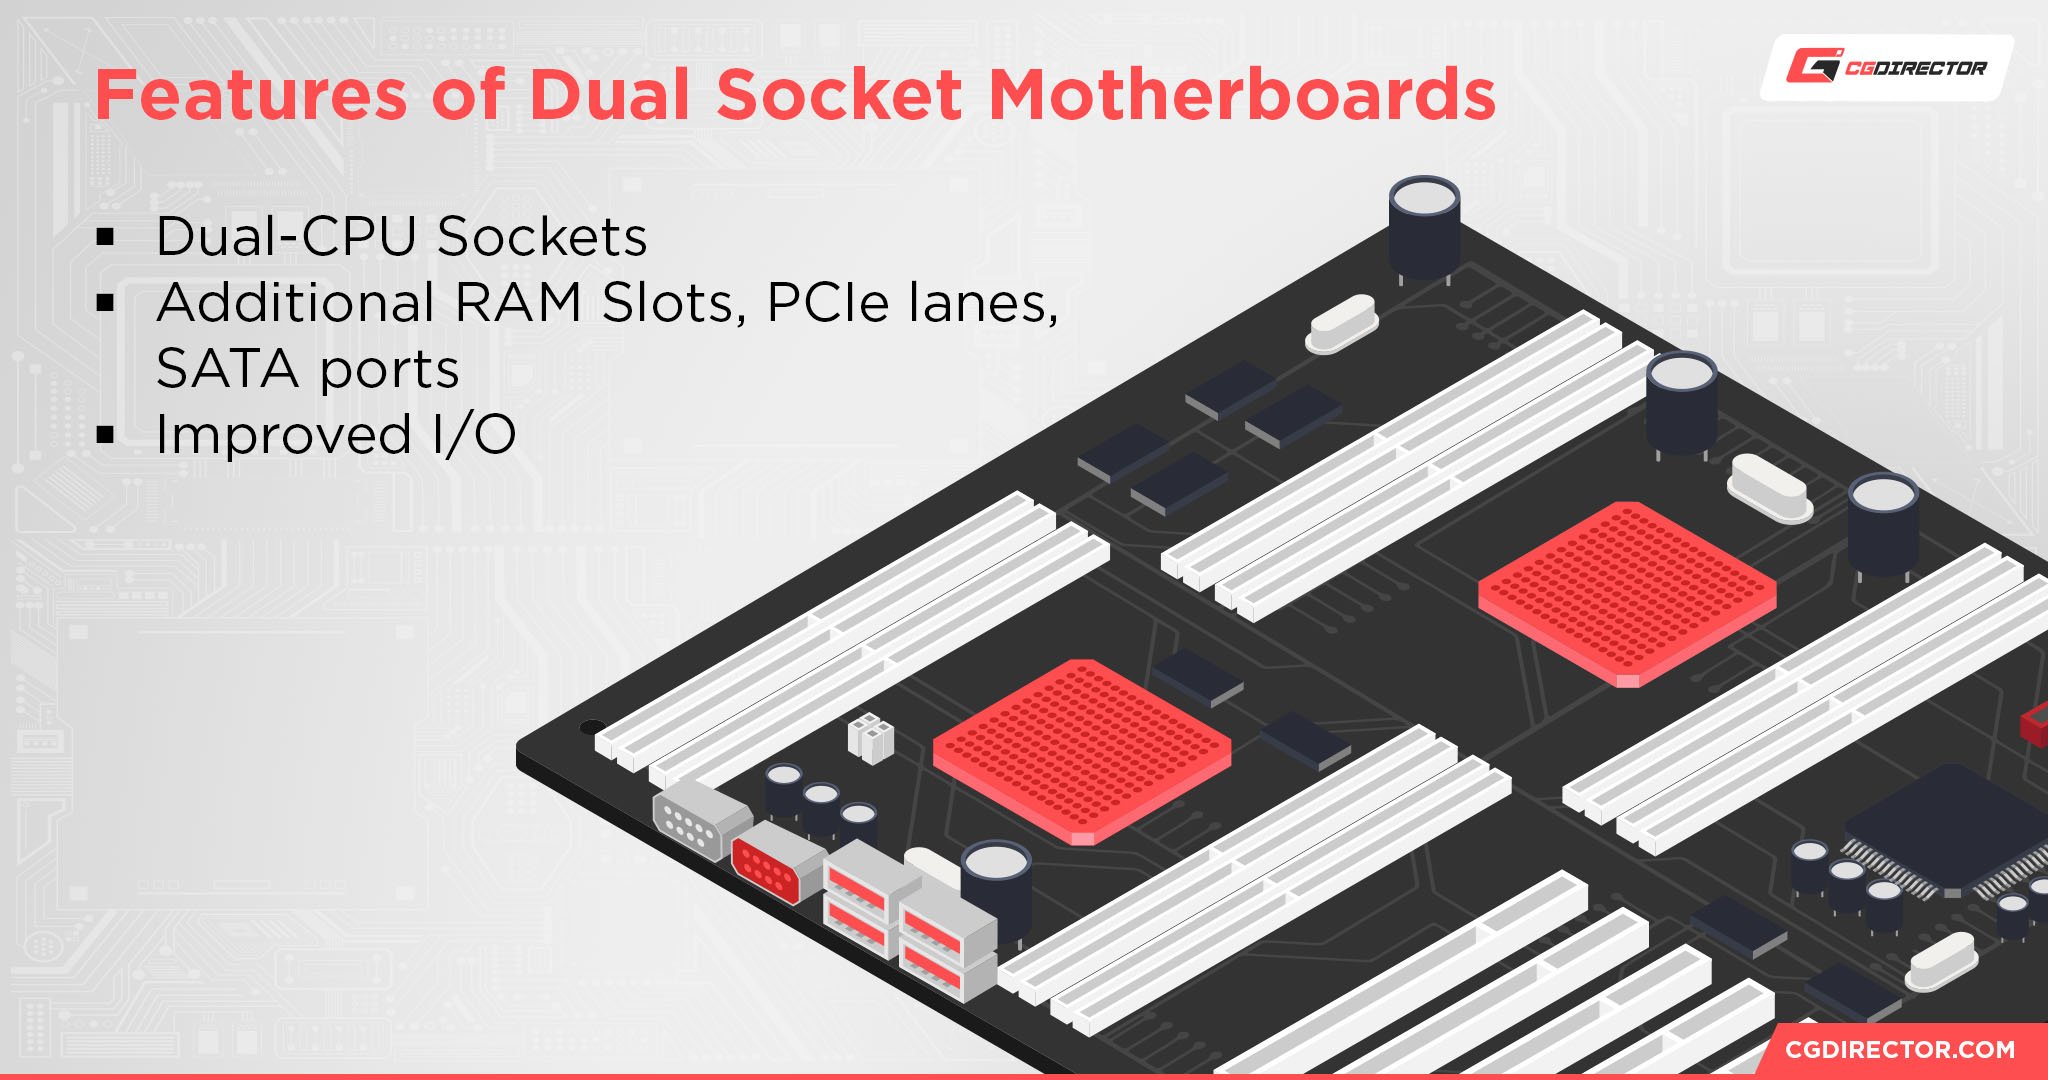 Features of Dual Socket Motherboards